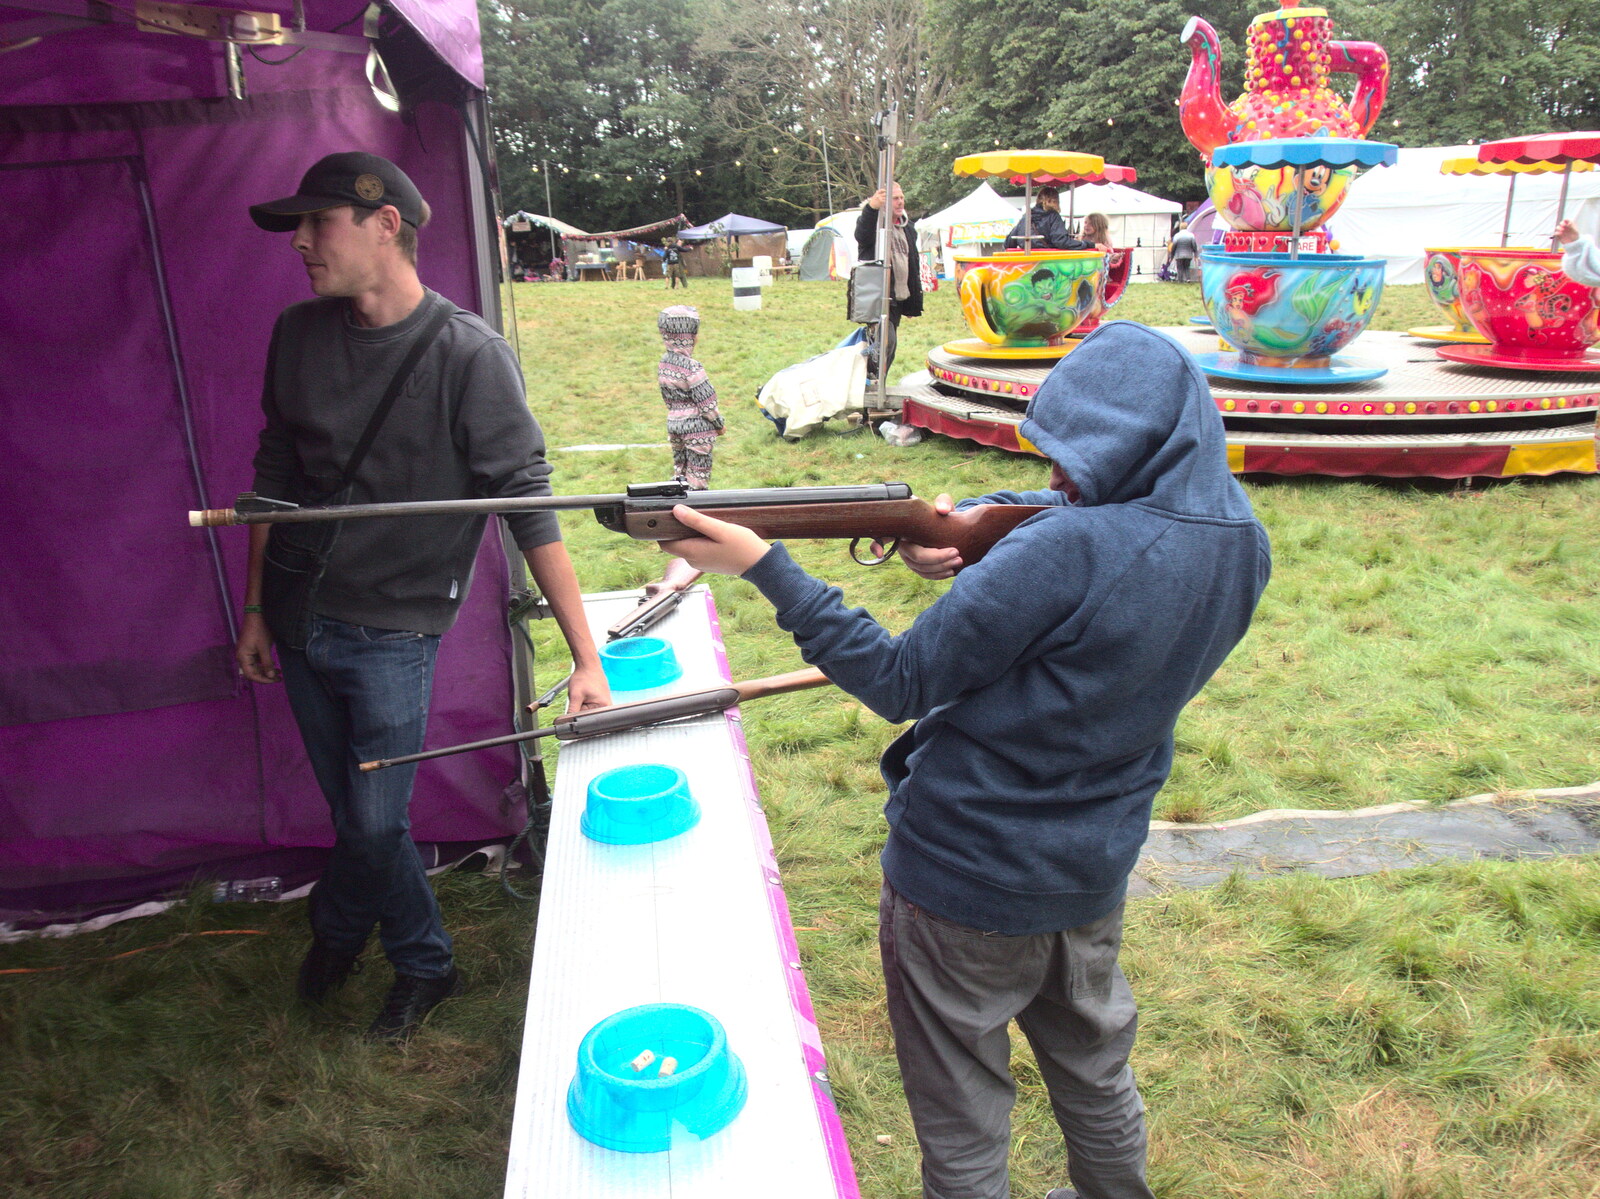 Fred lines up for a shot from Maui Waui Festival, Hill Farm, Gressenhall, Norfolk - 28th August 2021